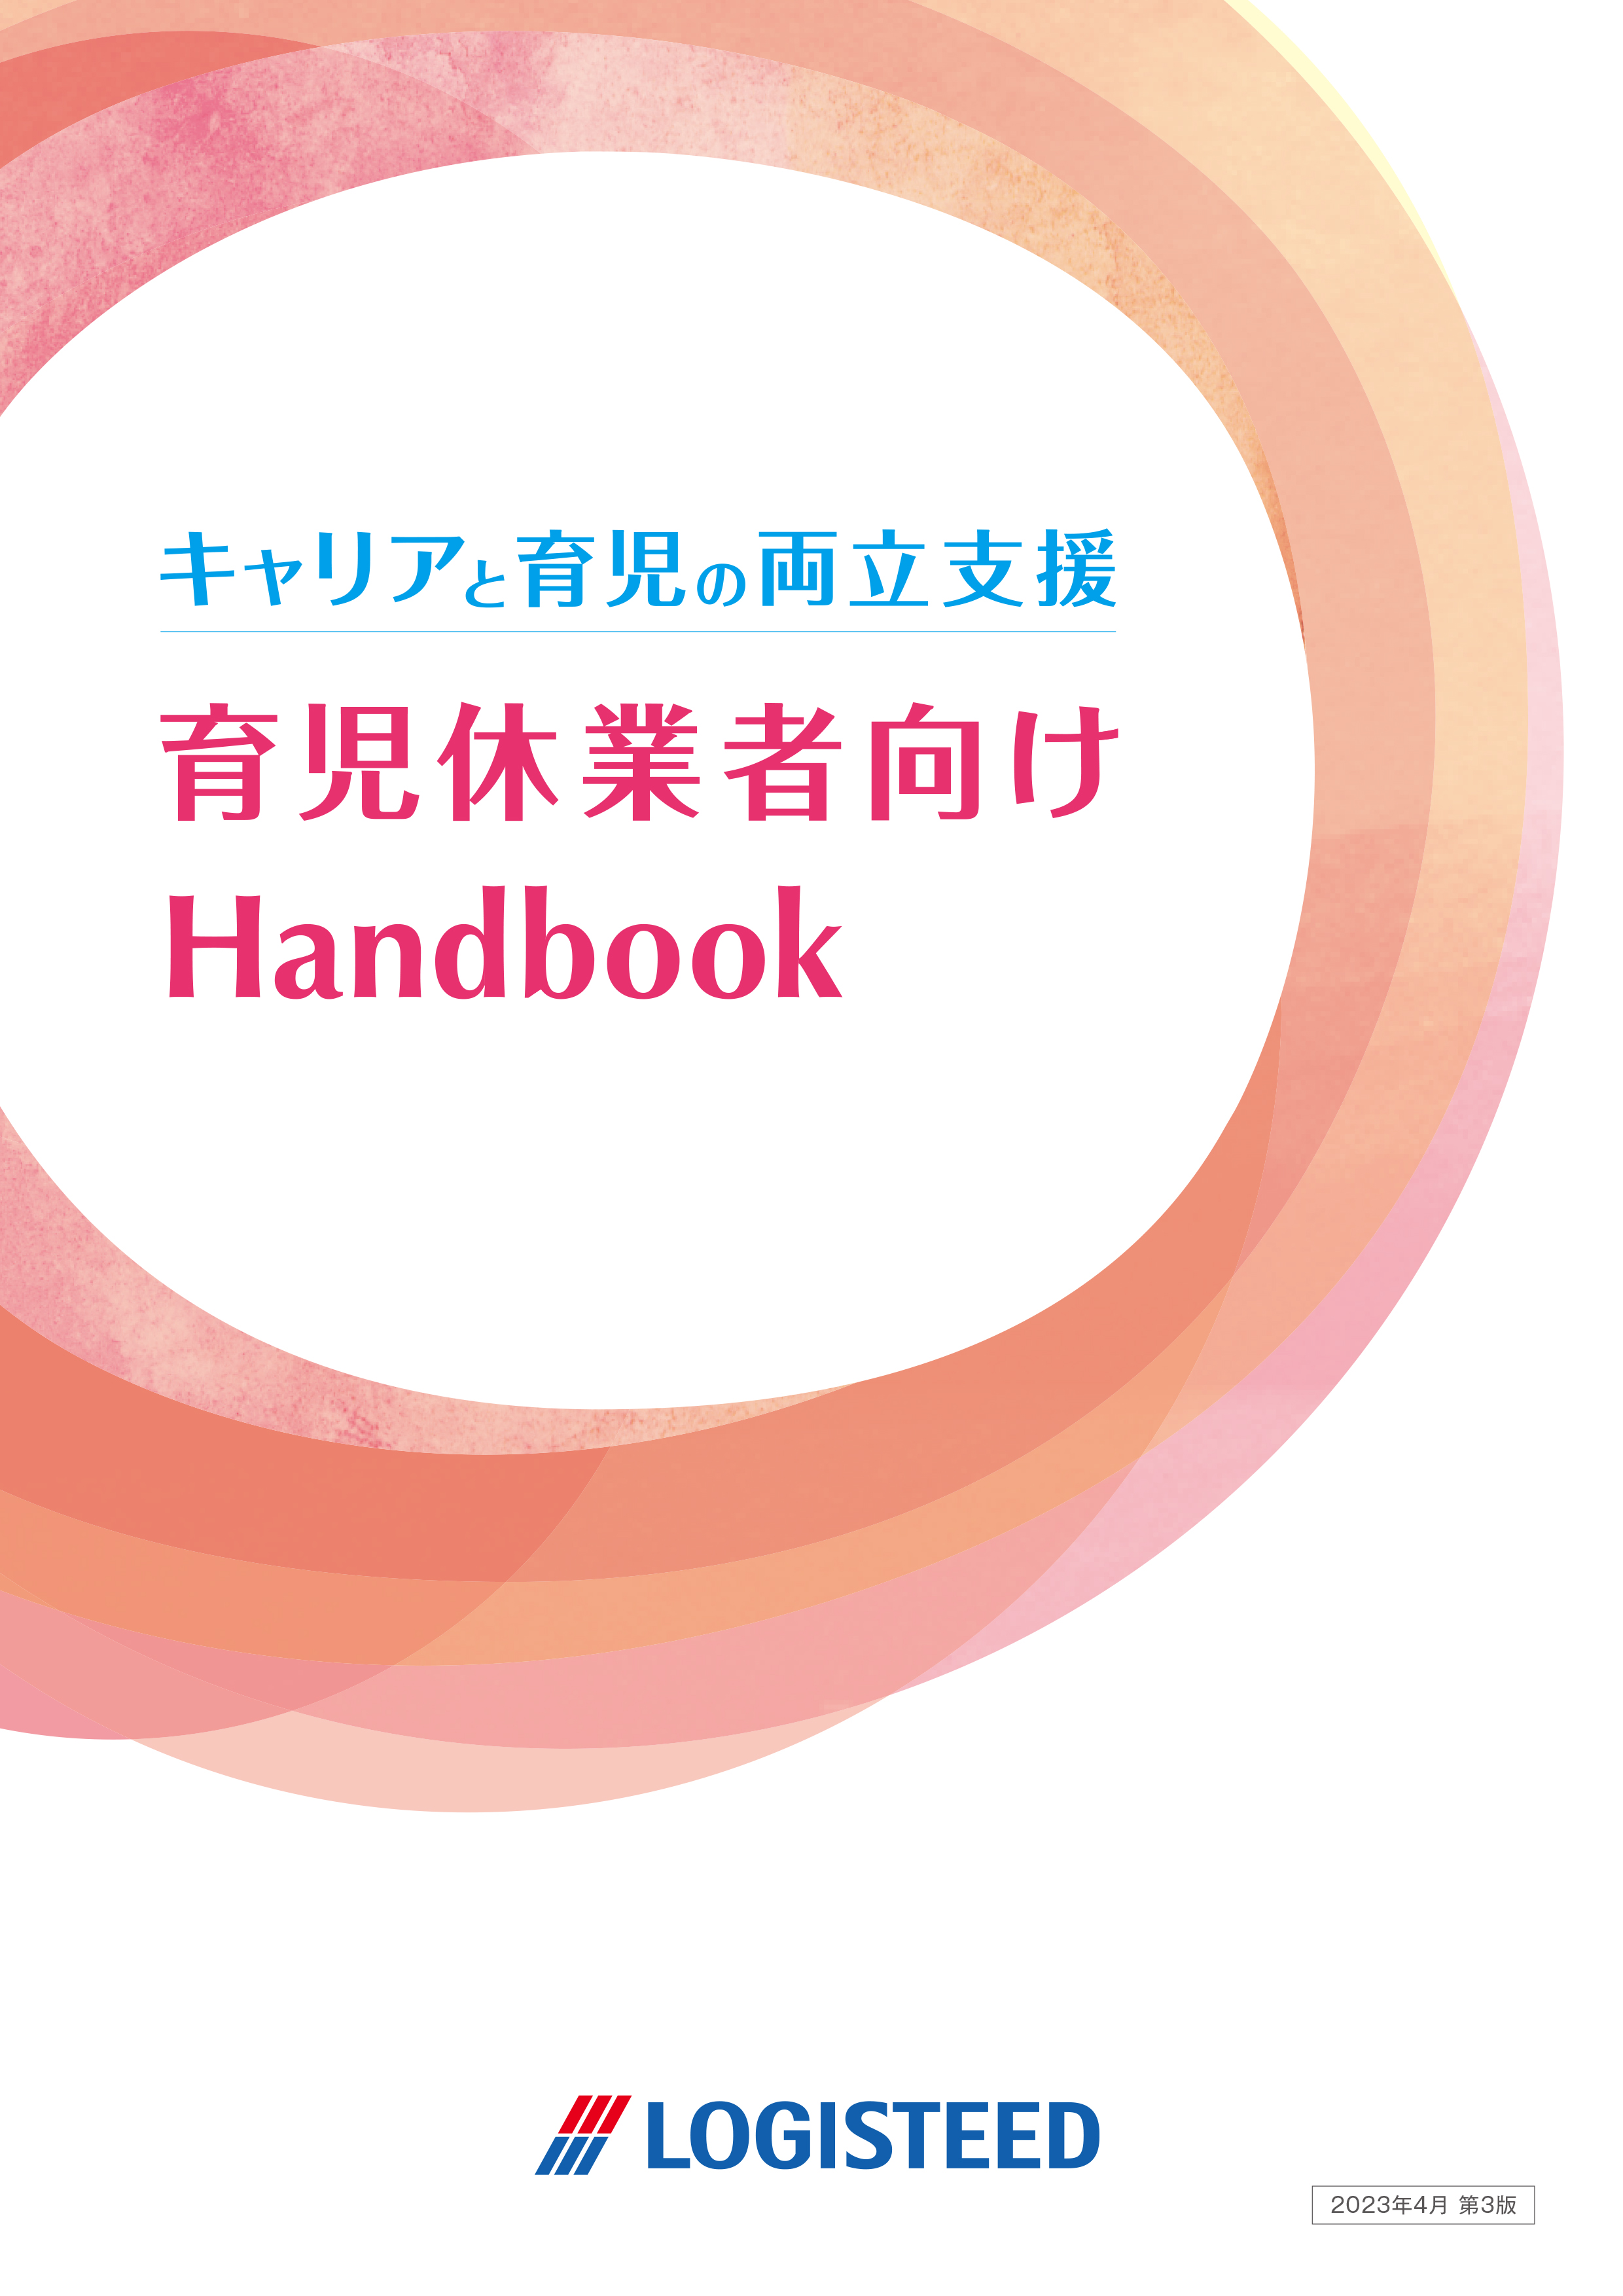 Handbook for Supporting Balancing Work and Childrearing